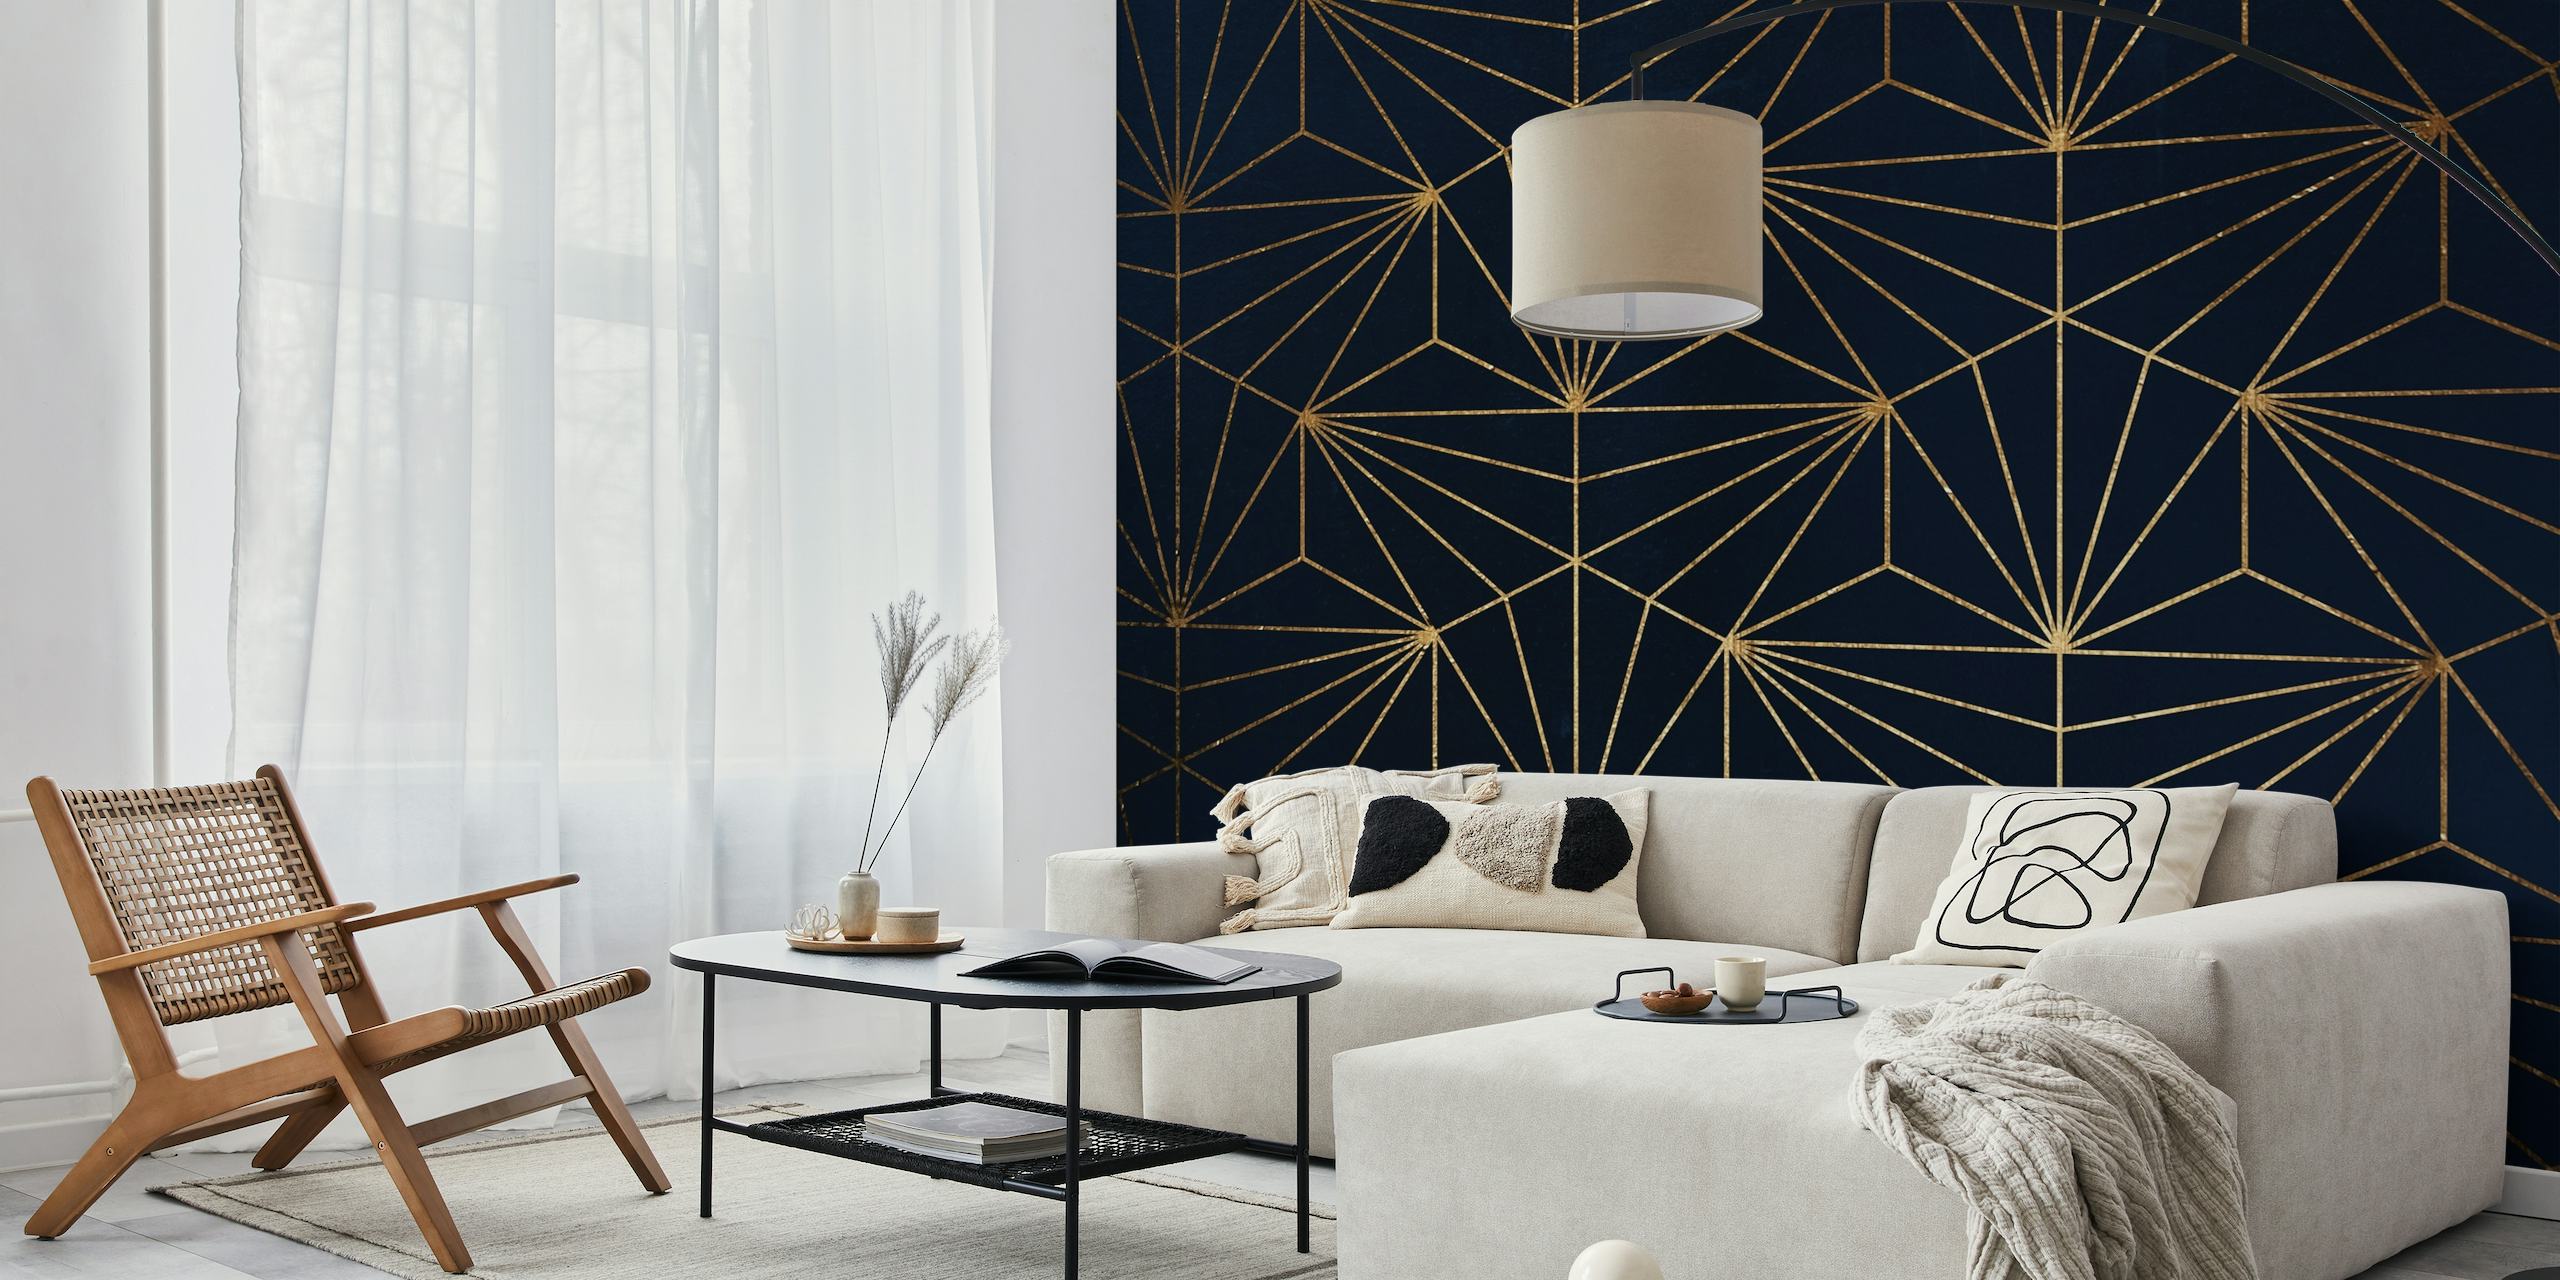 Intricate Casino-themed wall mural in dark and gold shades